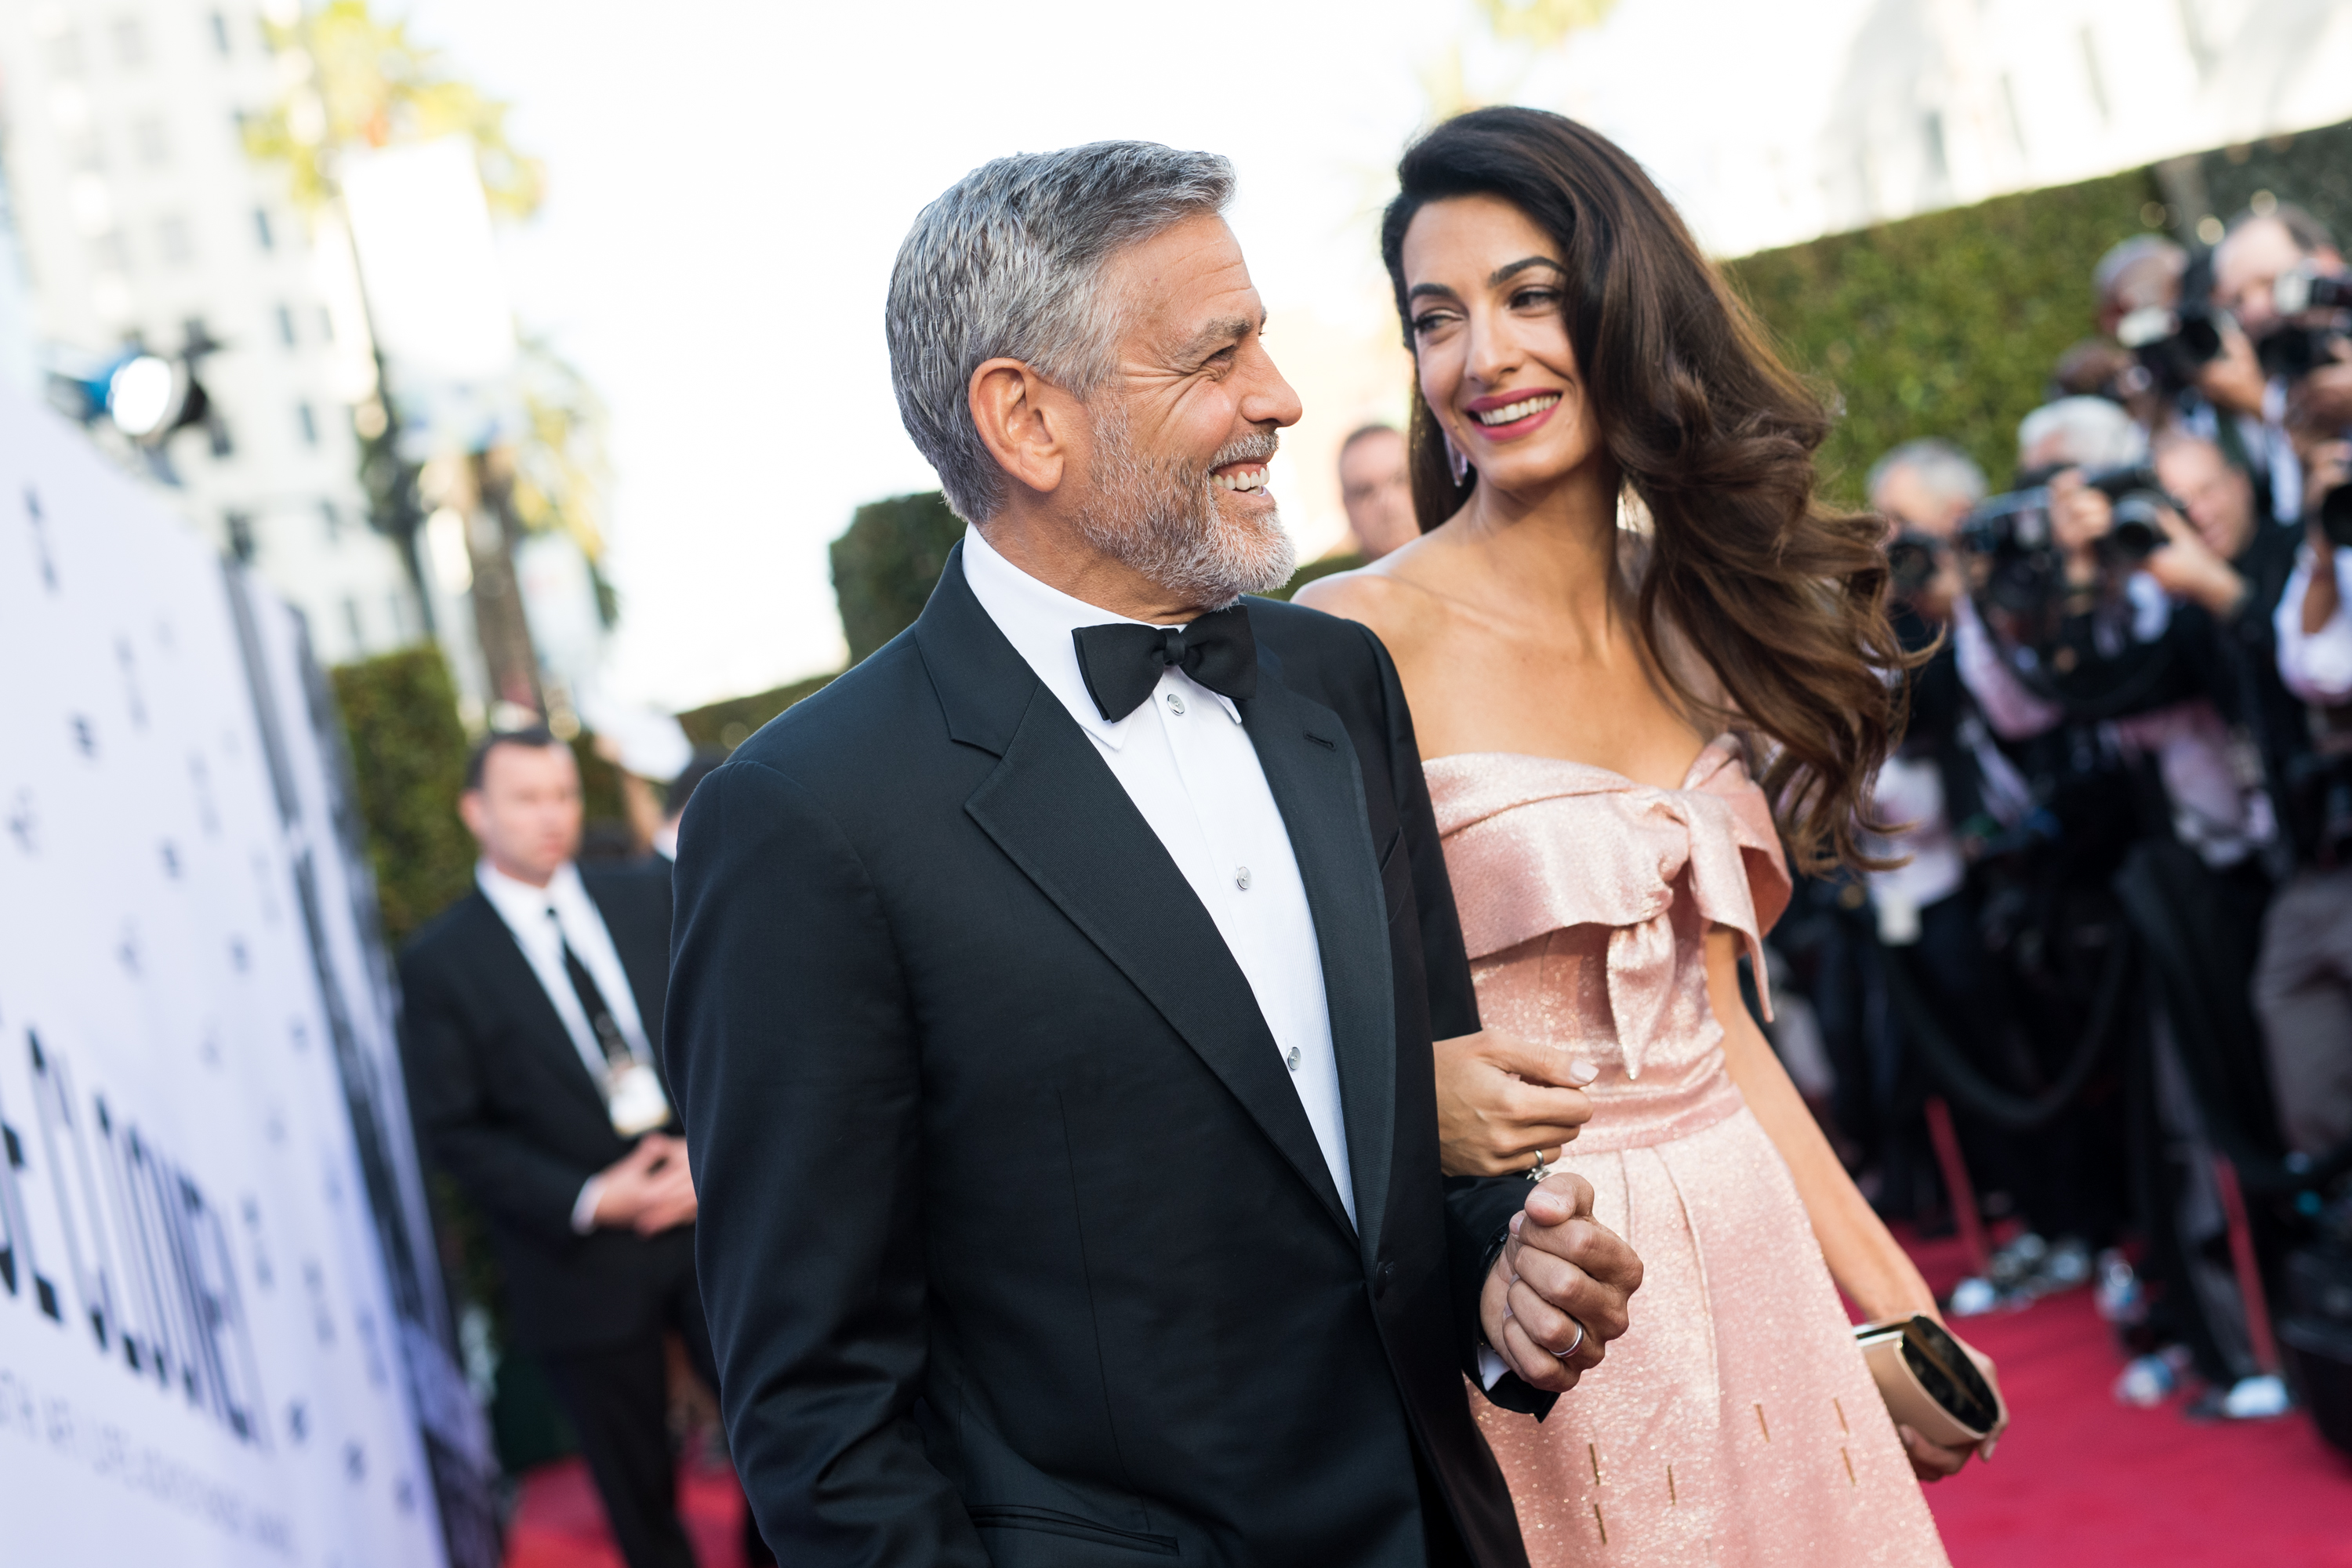 George and Amal Clooney at the 46th Life Achievement Award Gala in Hollywood, California on June 7, 2018 | Source: Getty Images